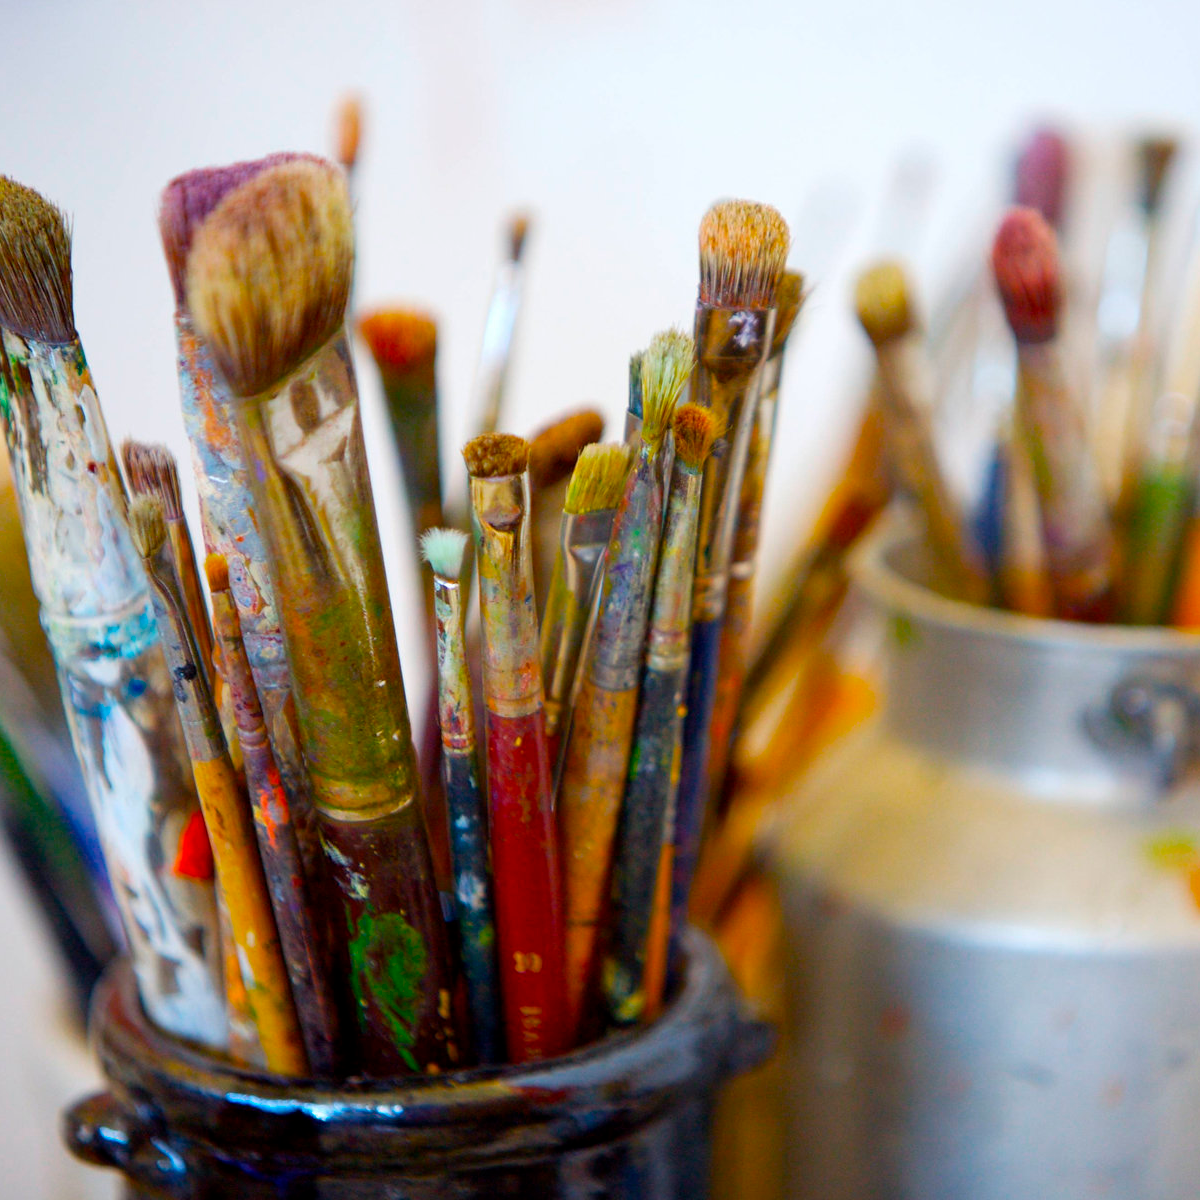 Historically, Why Did Artists Stop Using Natural Paints?